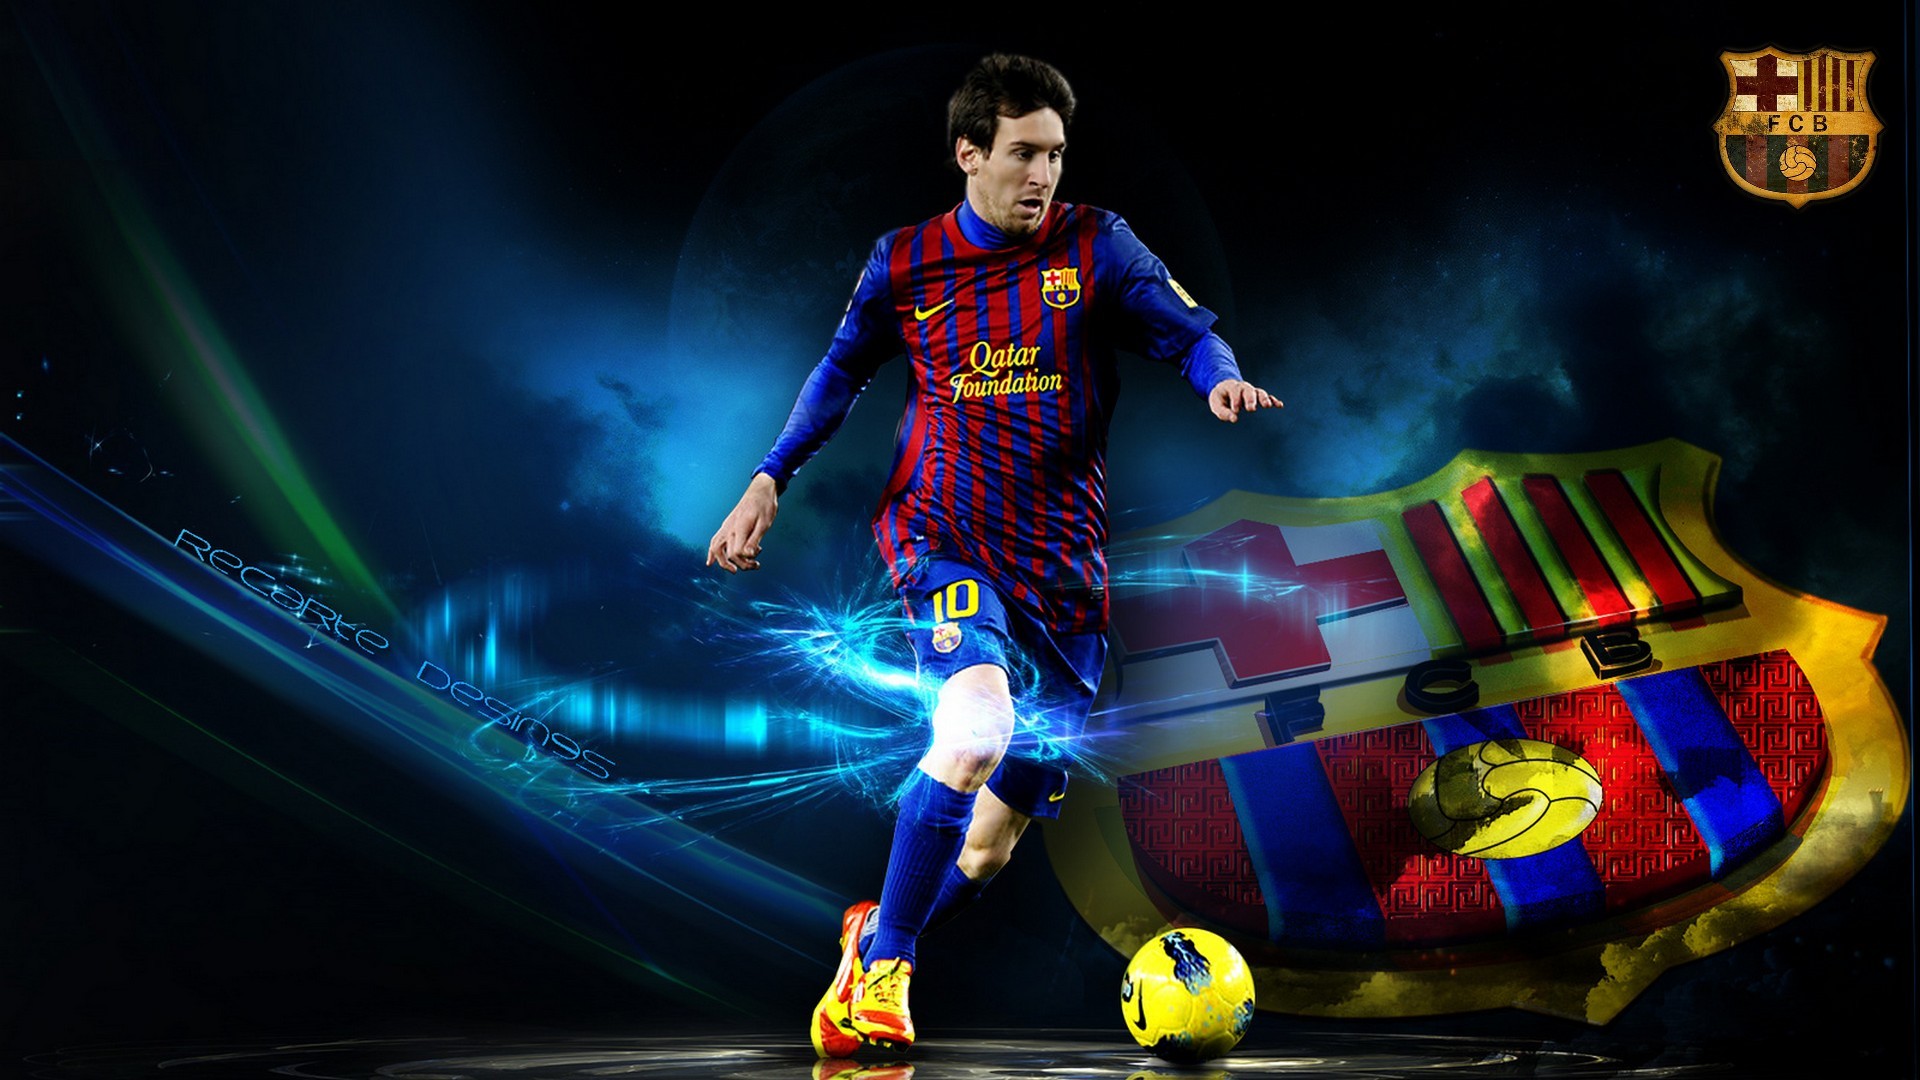 Leo Messi Desktop Wallpaper With Resolution 1920X1080 pixel. You can make this wallpaper for your Mac or Windows Desktop Background, iPhone, Android or Tablet and another Smartphone device for free